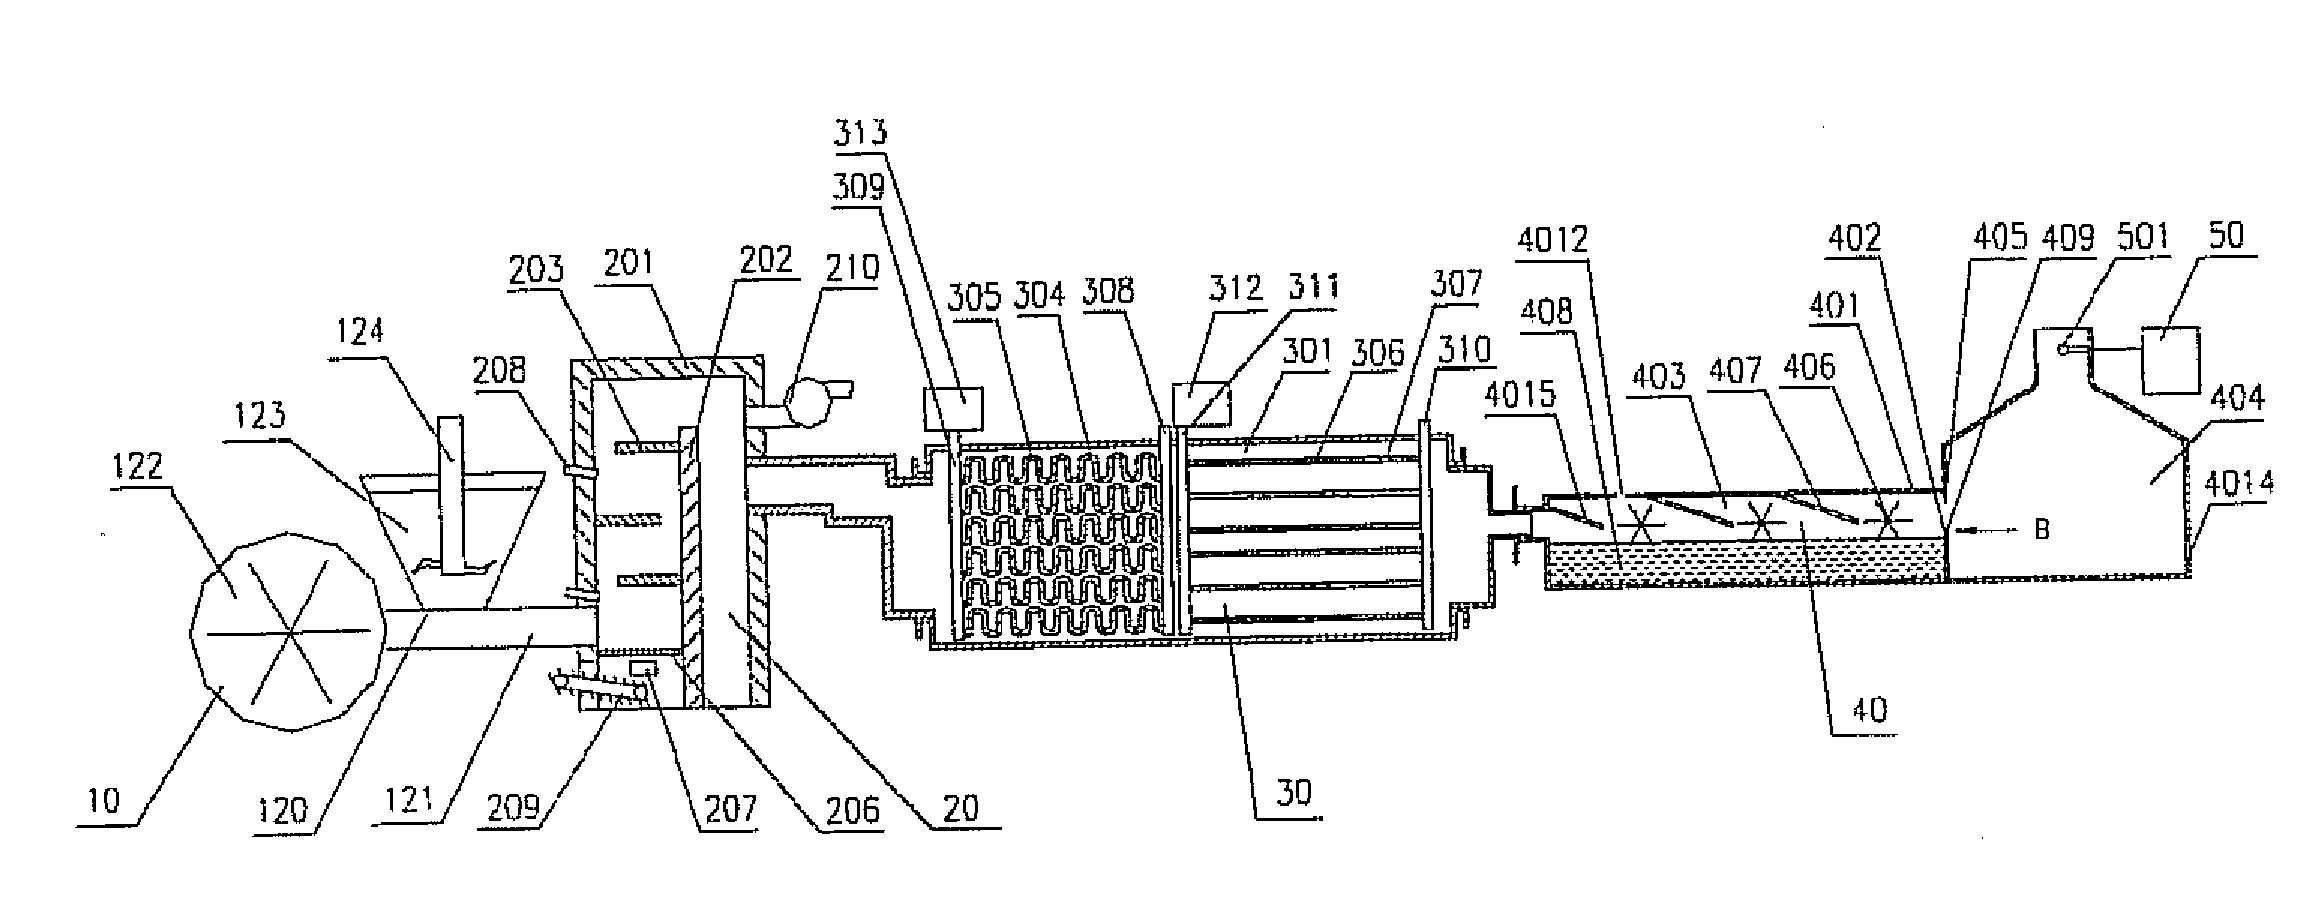 Apparatus for incinerating waste and process for comprehensive utilization of waste